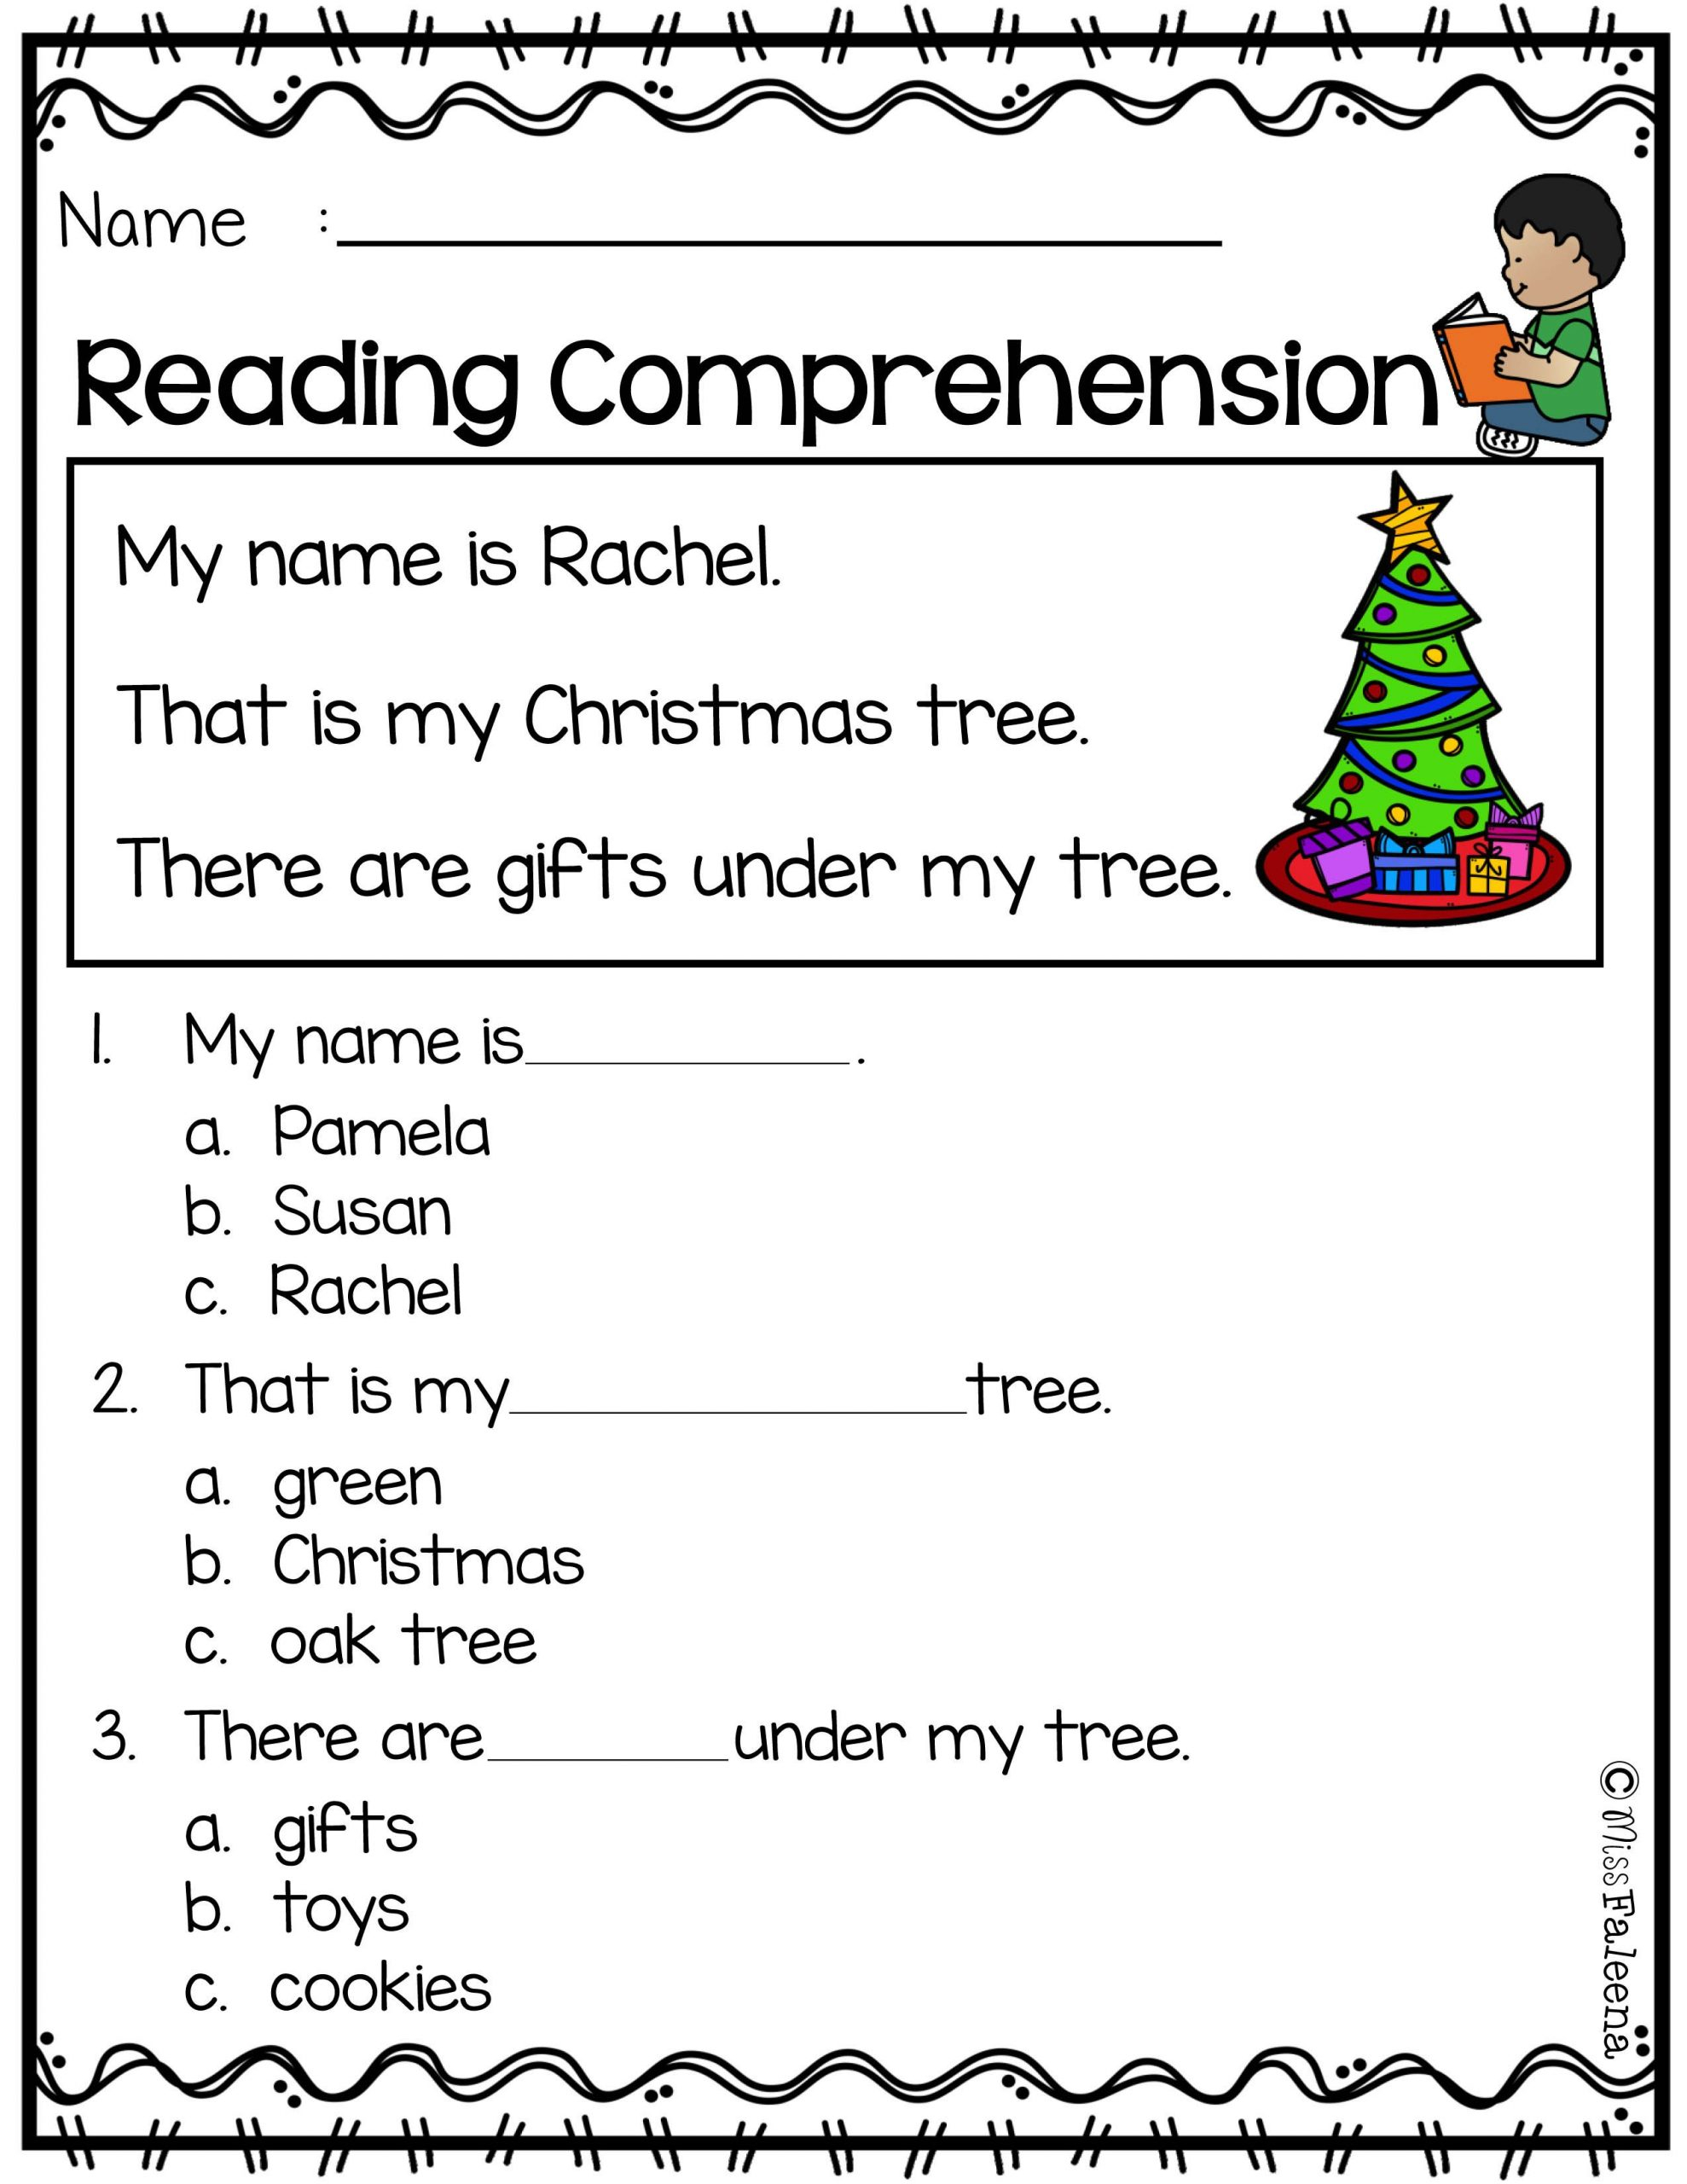 halloween-reading-comprehension-worksheets-for-first-grade-free-first